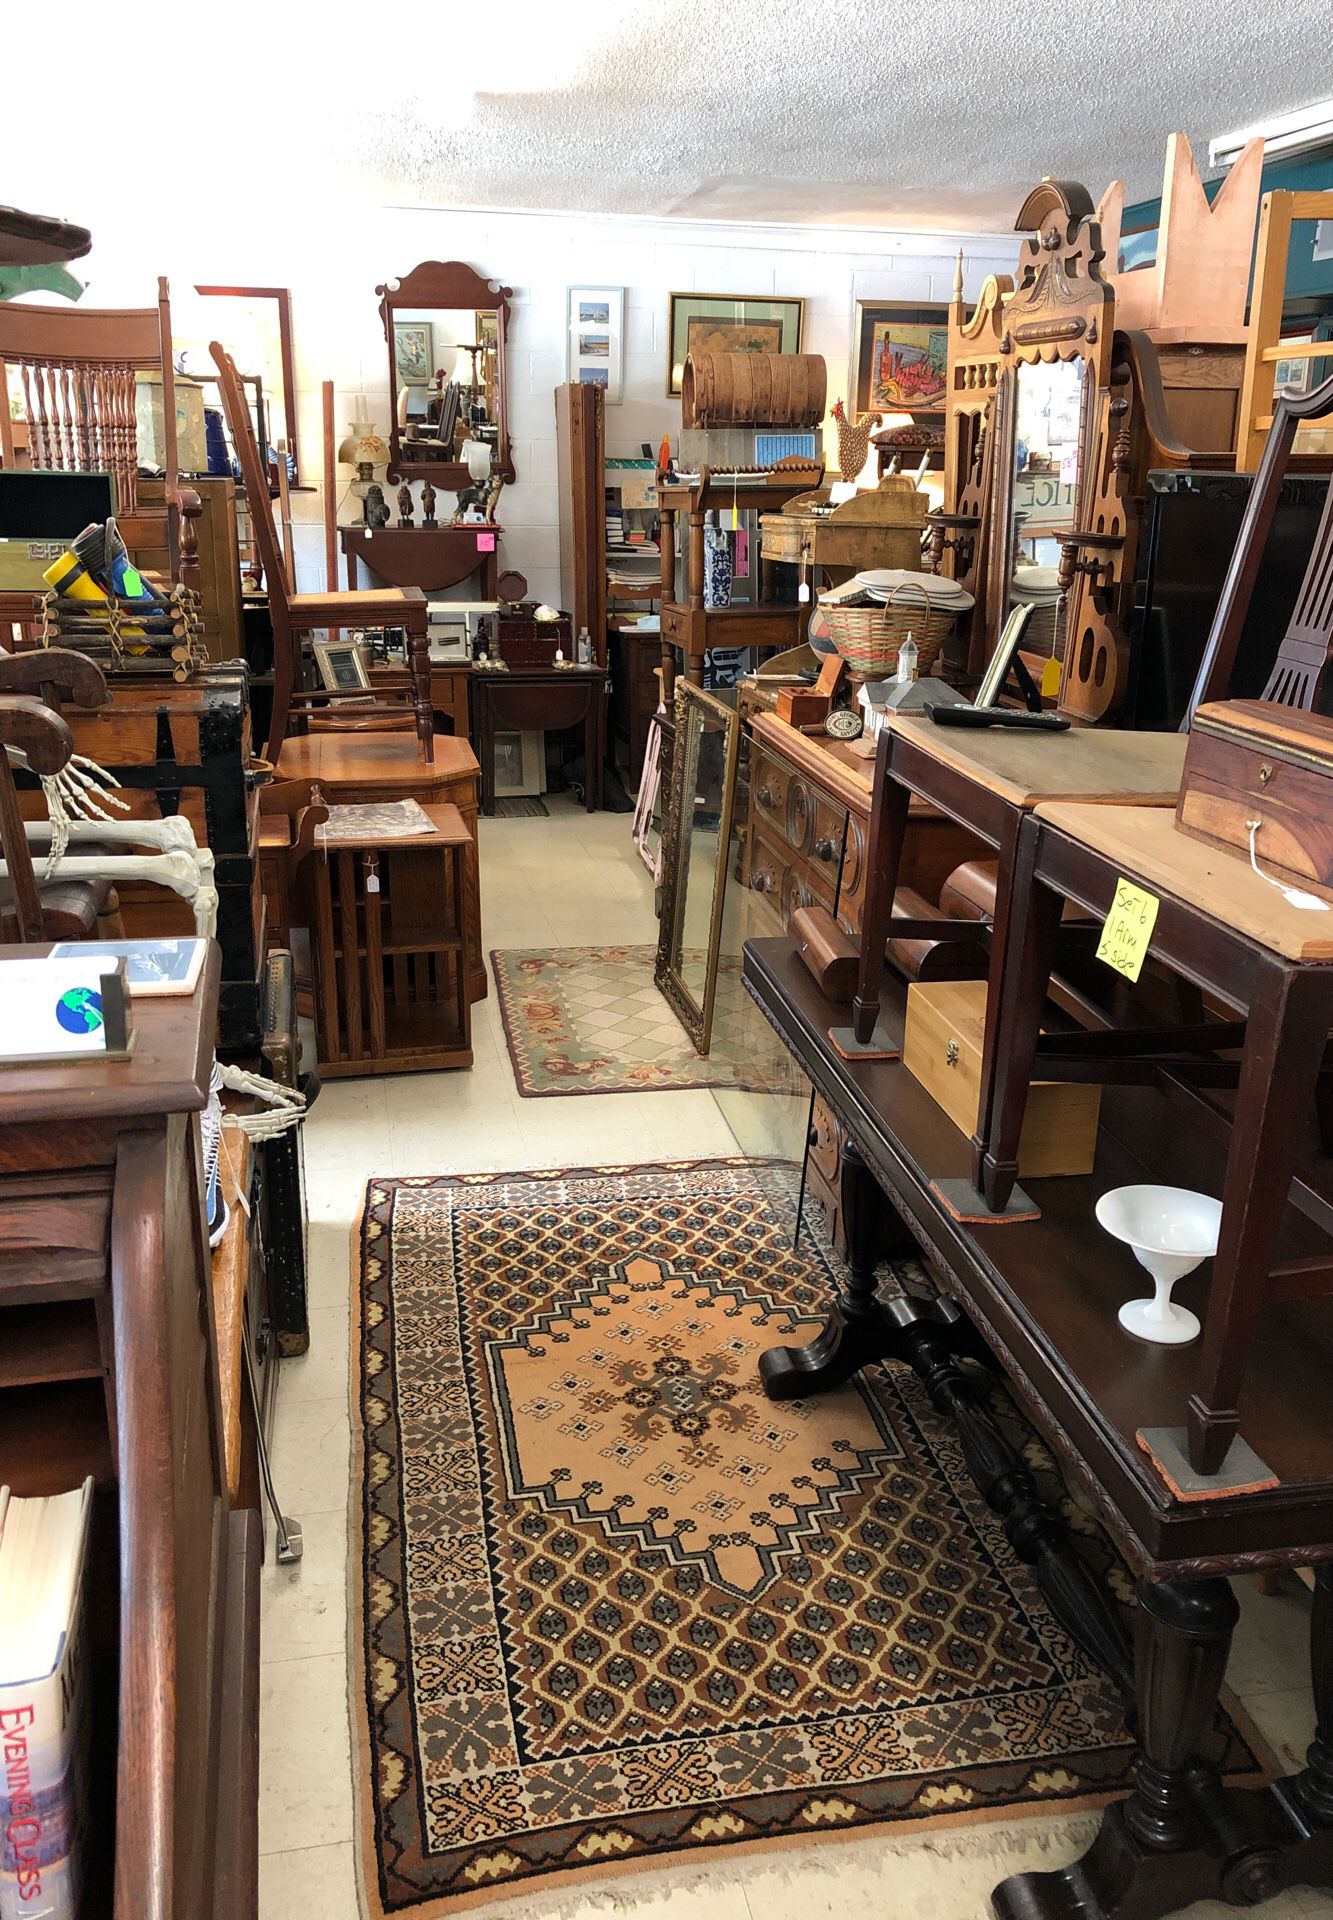 Shop full of antiques and used furniture